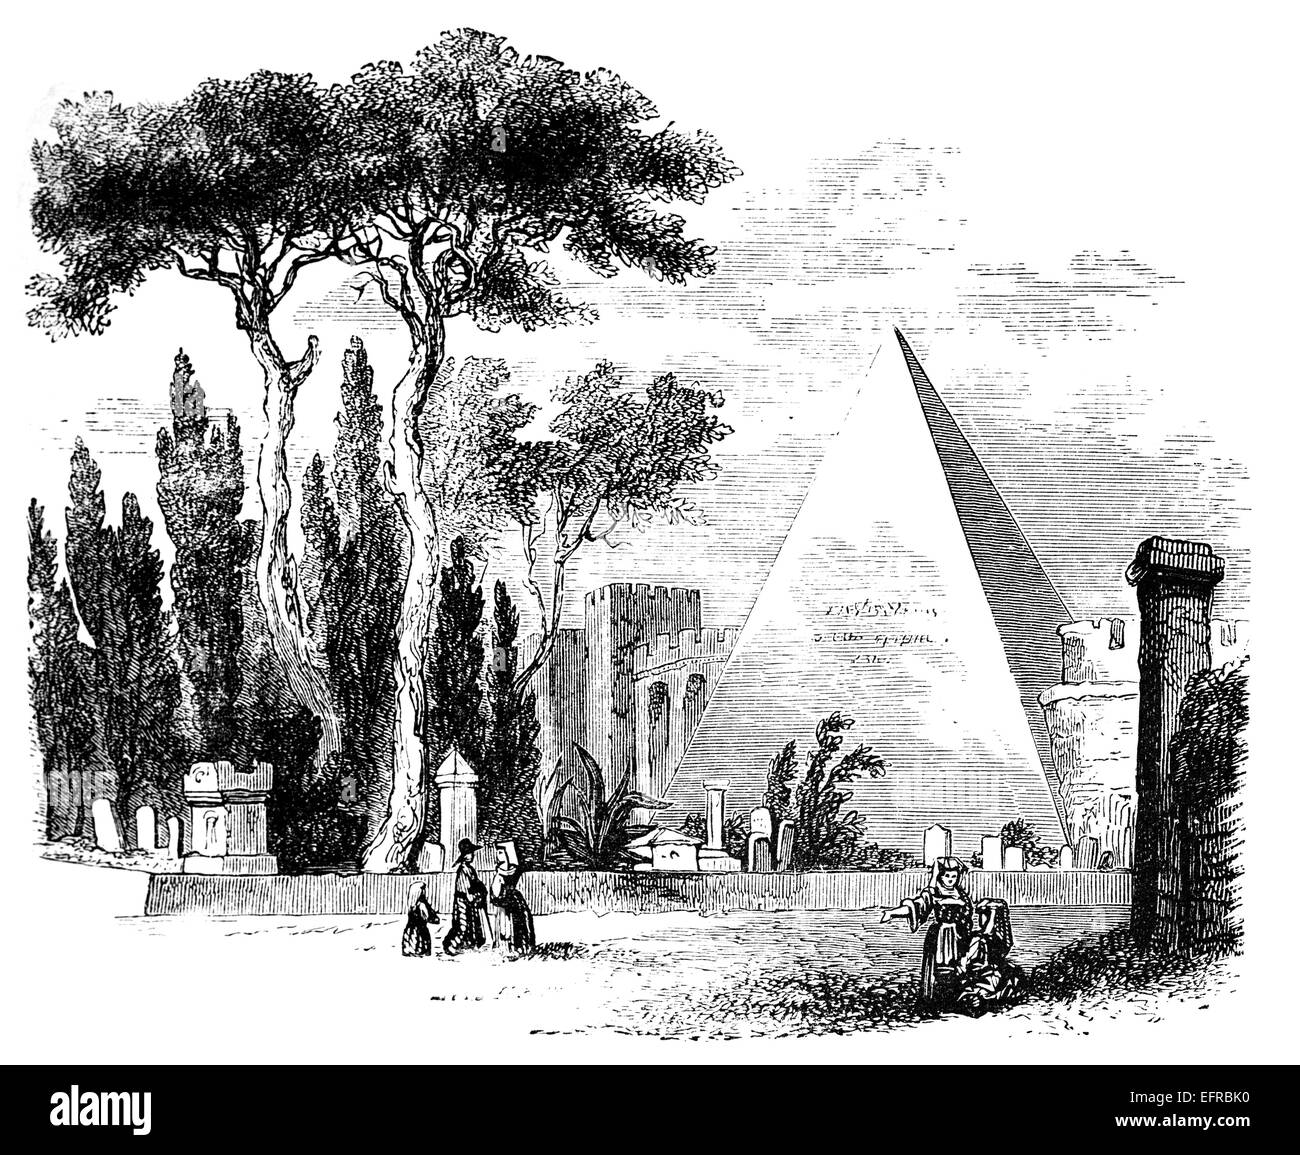 Pyramid of Cestius, Rome, photographed from 'Italian Pictures Drawn with Pen and Pencil' published in London ca. 1870. Stock Photo